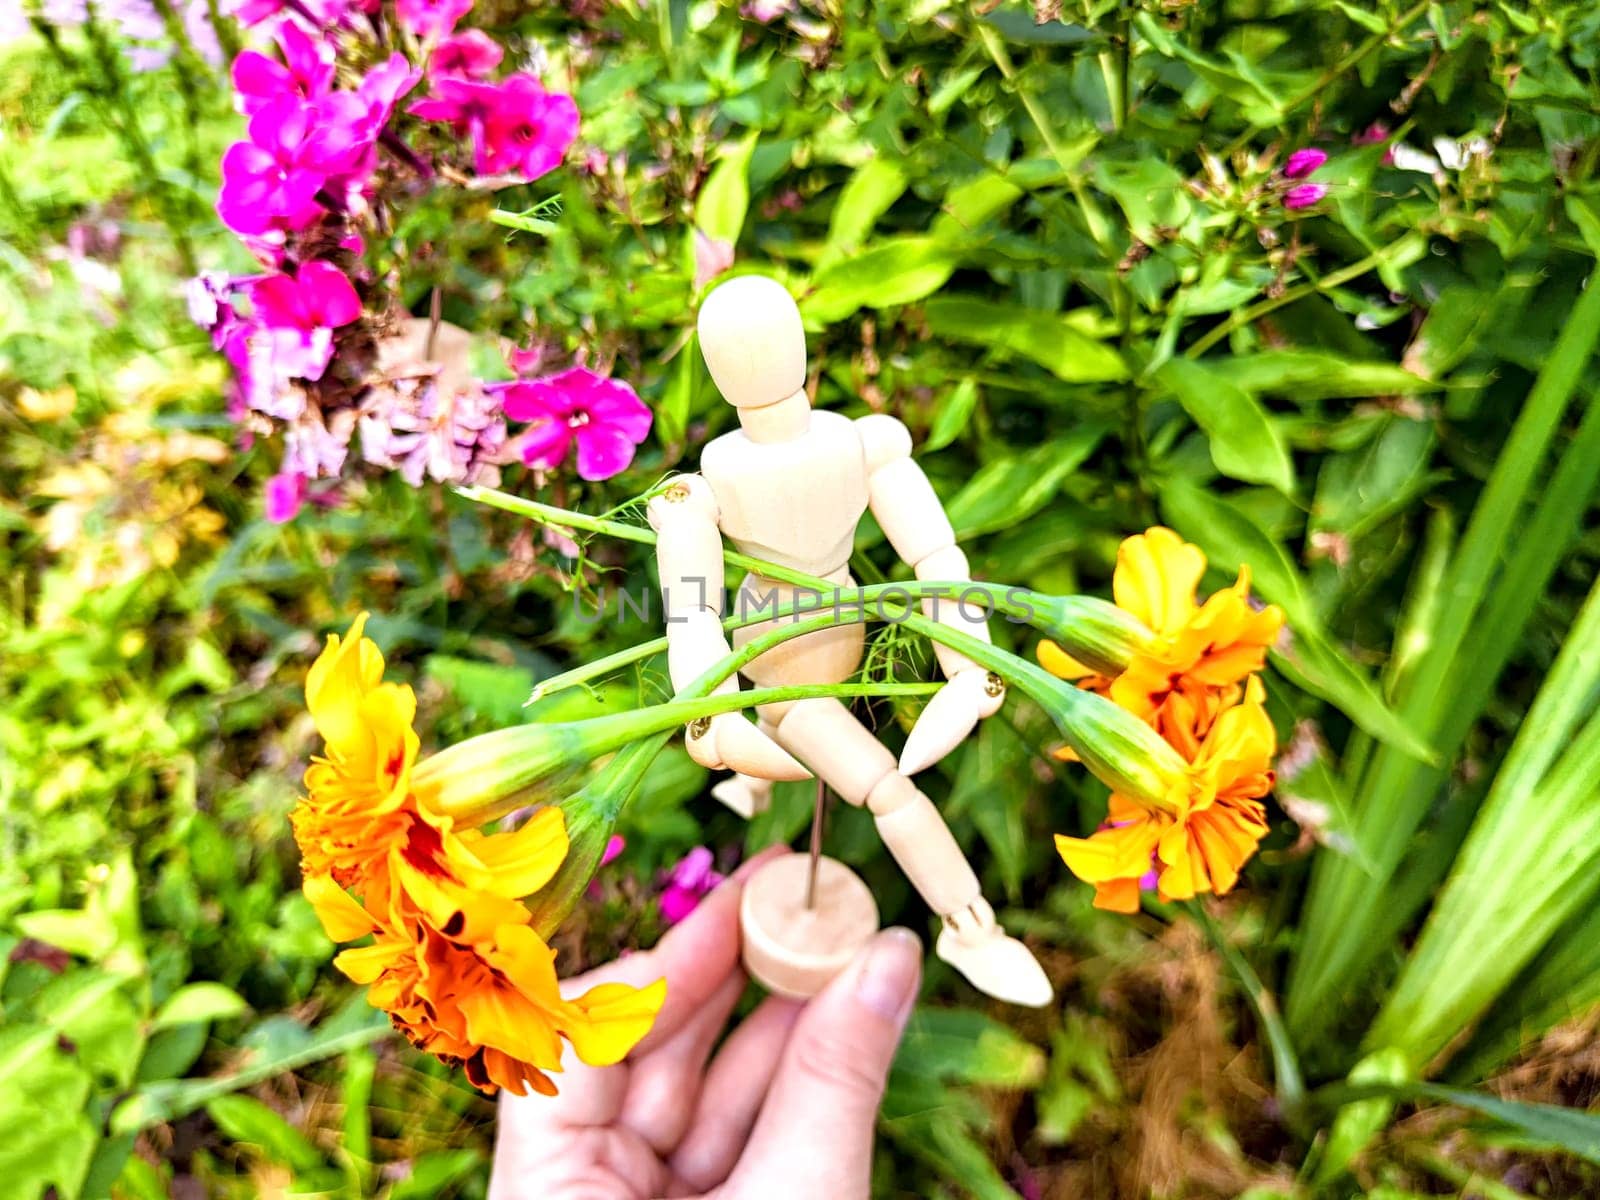 Wooden toy man with flowers in hand of woman on background grass. Concept of holiday, gift bouquet, Valentine's Day, proposal, engagement, declaration of love, Mother's Day. Caring, loving, romantic